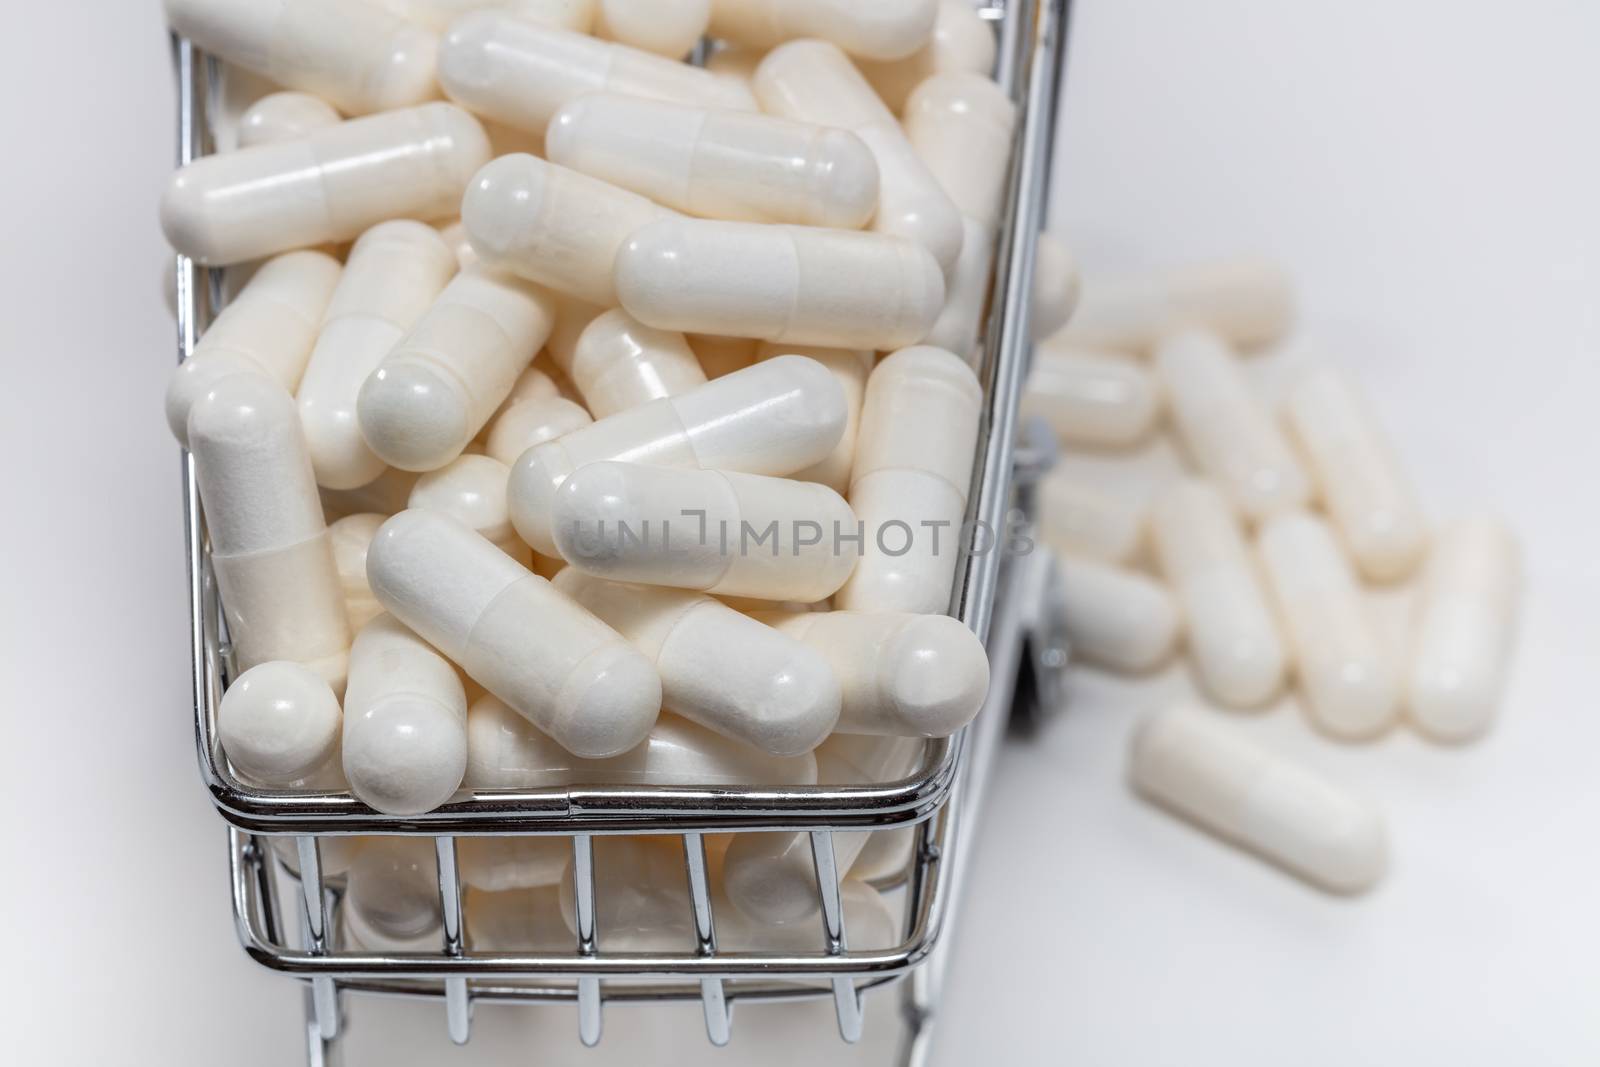 High angle shot of a small shopping cart full of white pills. Some pills under the cart blurry in the background. White background. Close up shot. Shopping online, pharmaceutical business concepts. by DamantisZ